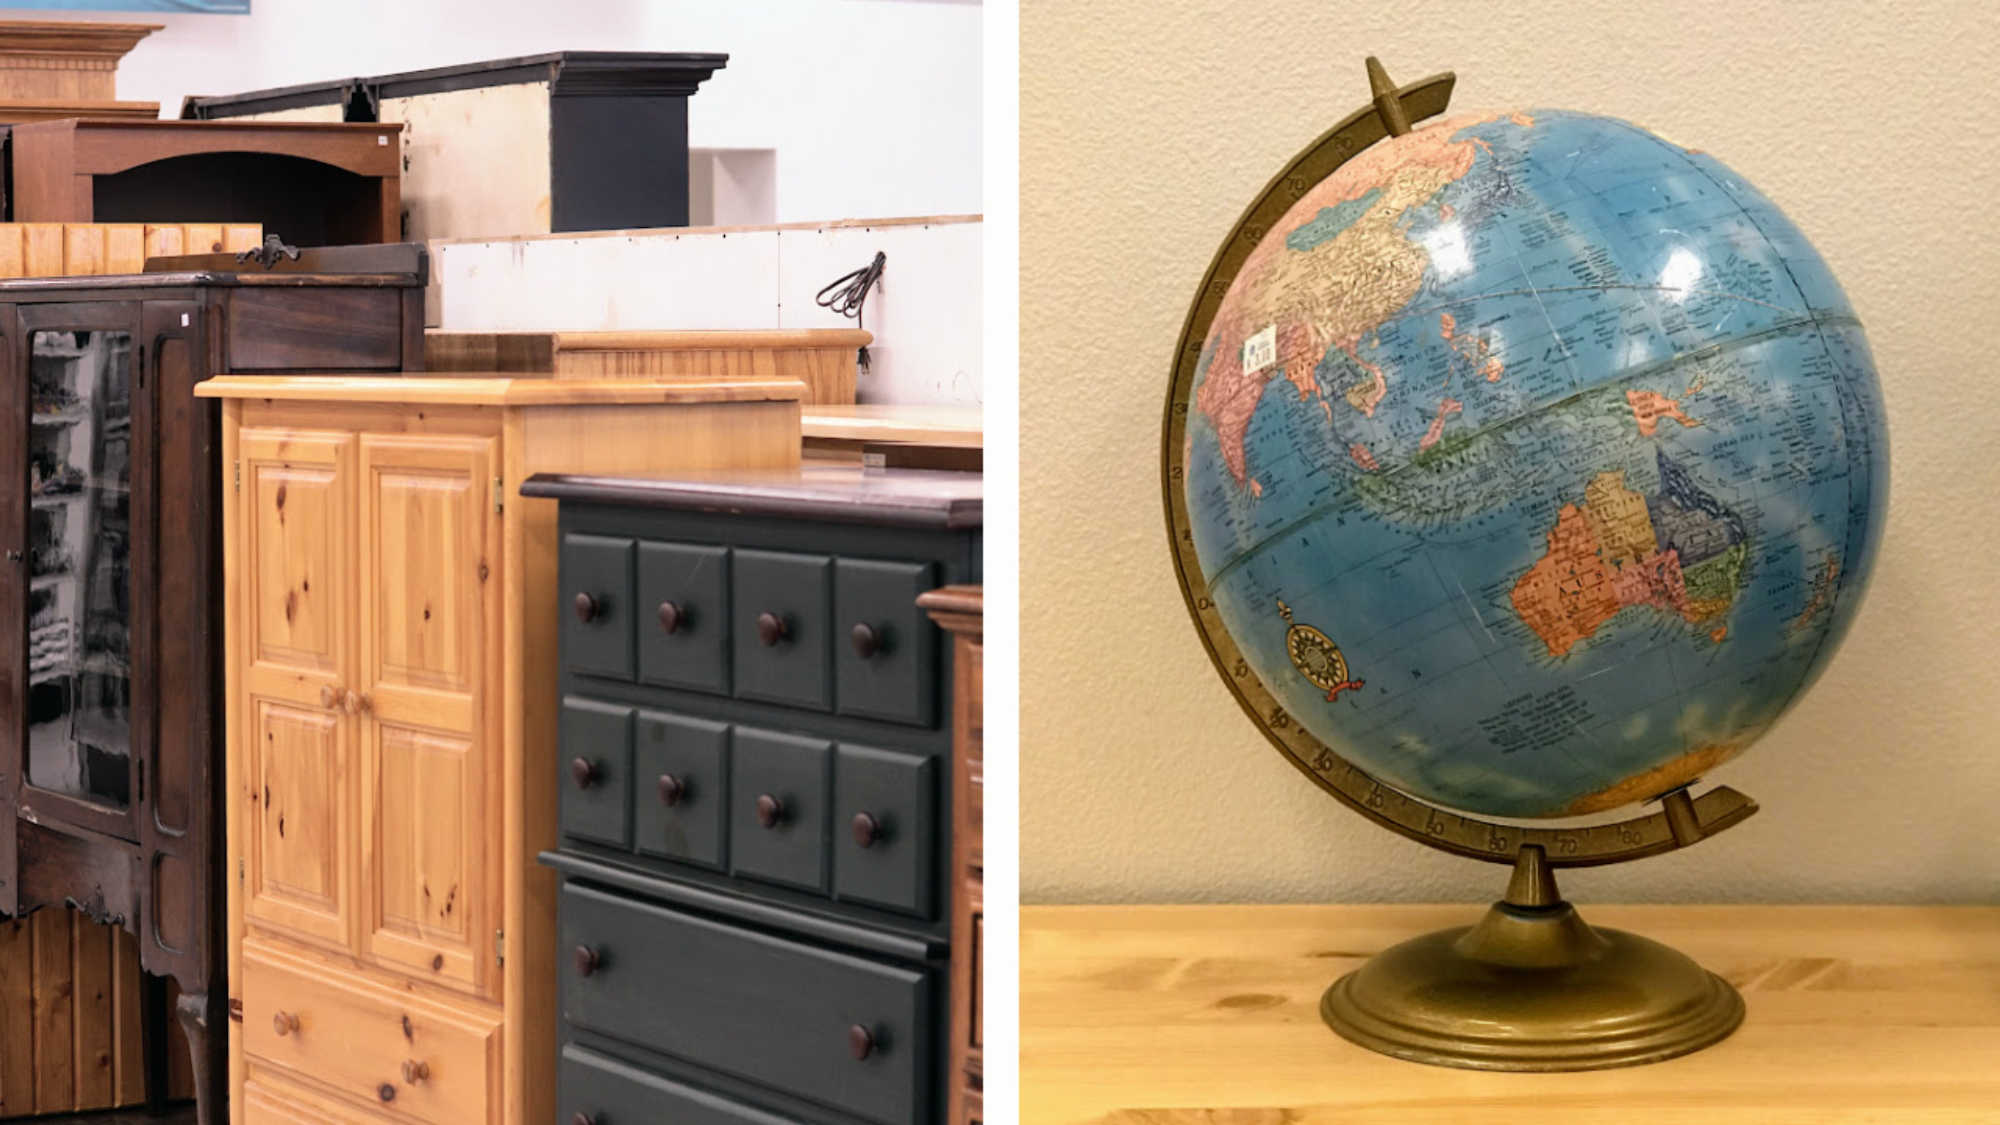 On the left, a number of dressers available for purchase at DI on the right, a globe that was bought from a DI store